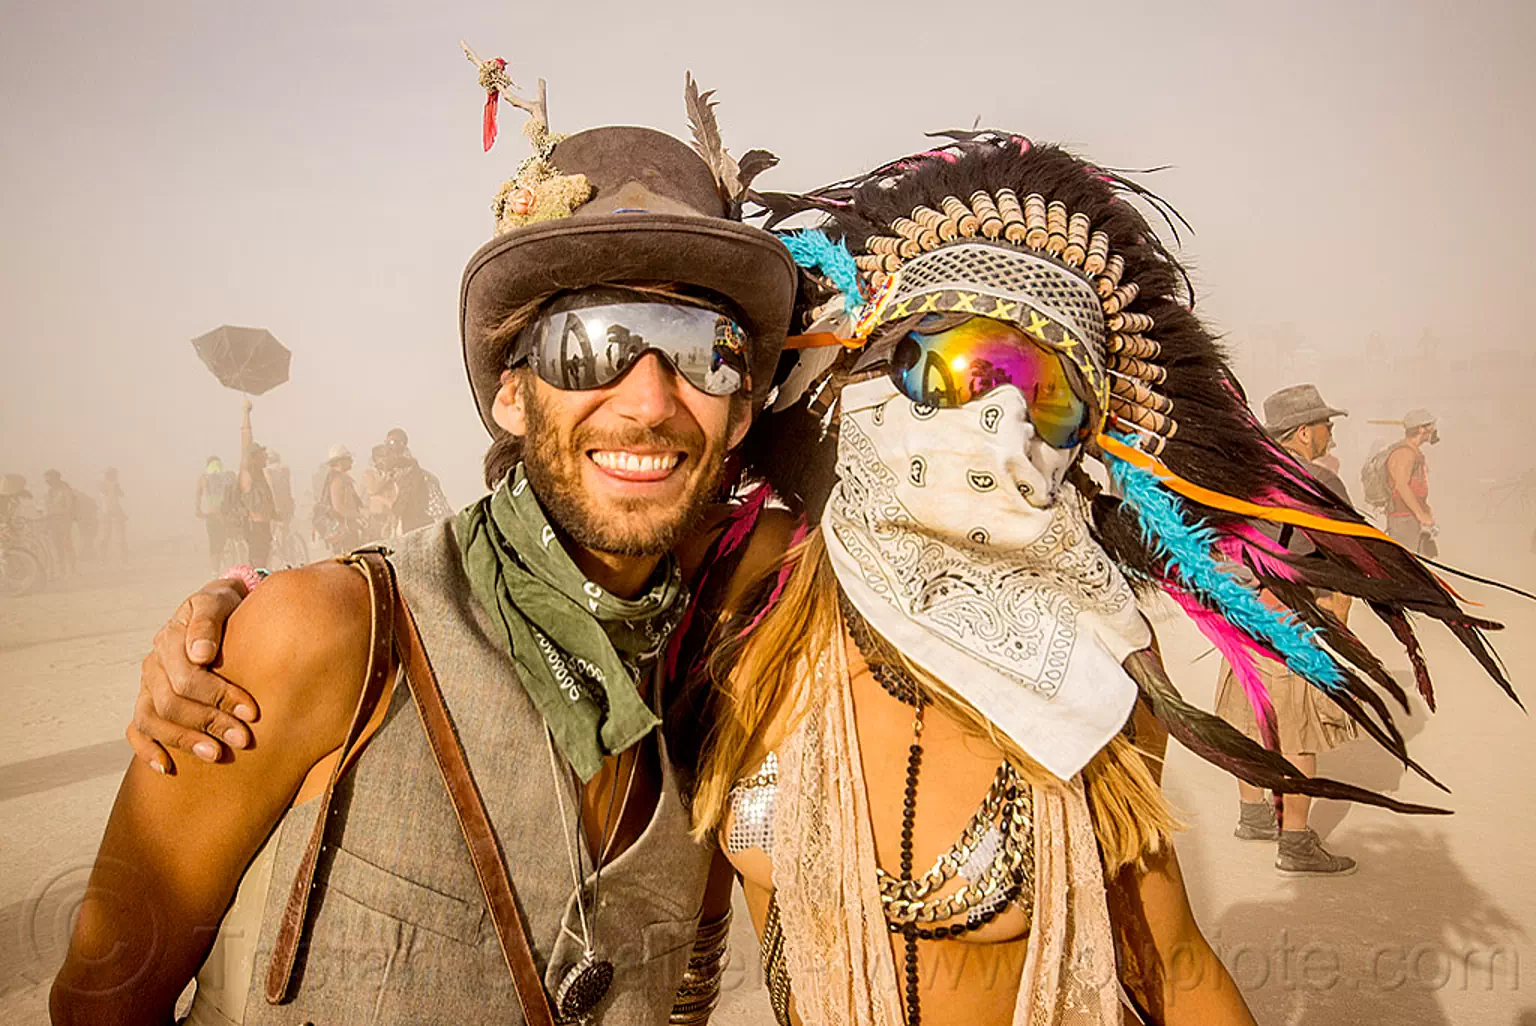 couple during white out - burning man 2015, bandana, burning man, dust storm, face mask, feather headdress, feathers, mathieu, mirror sunglasses, pia, white out, windy, woman